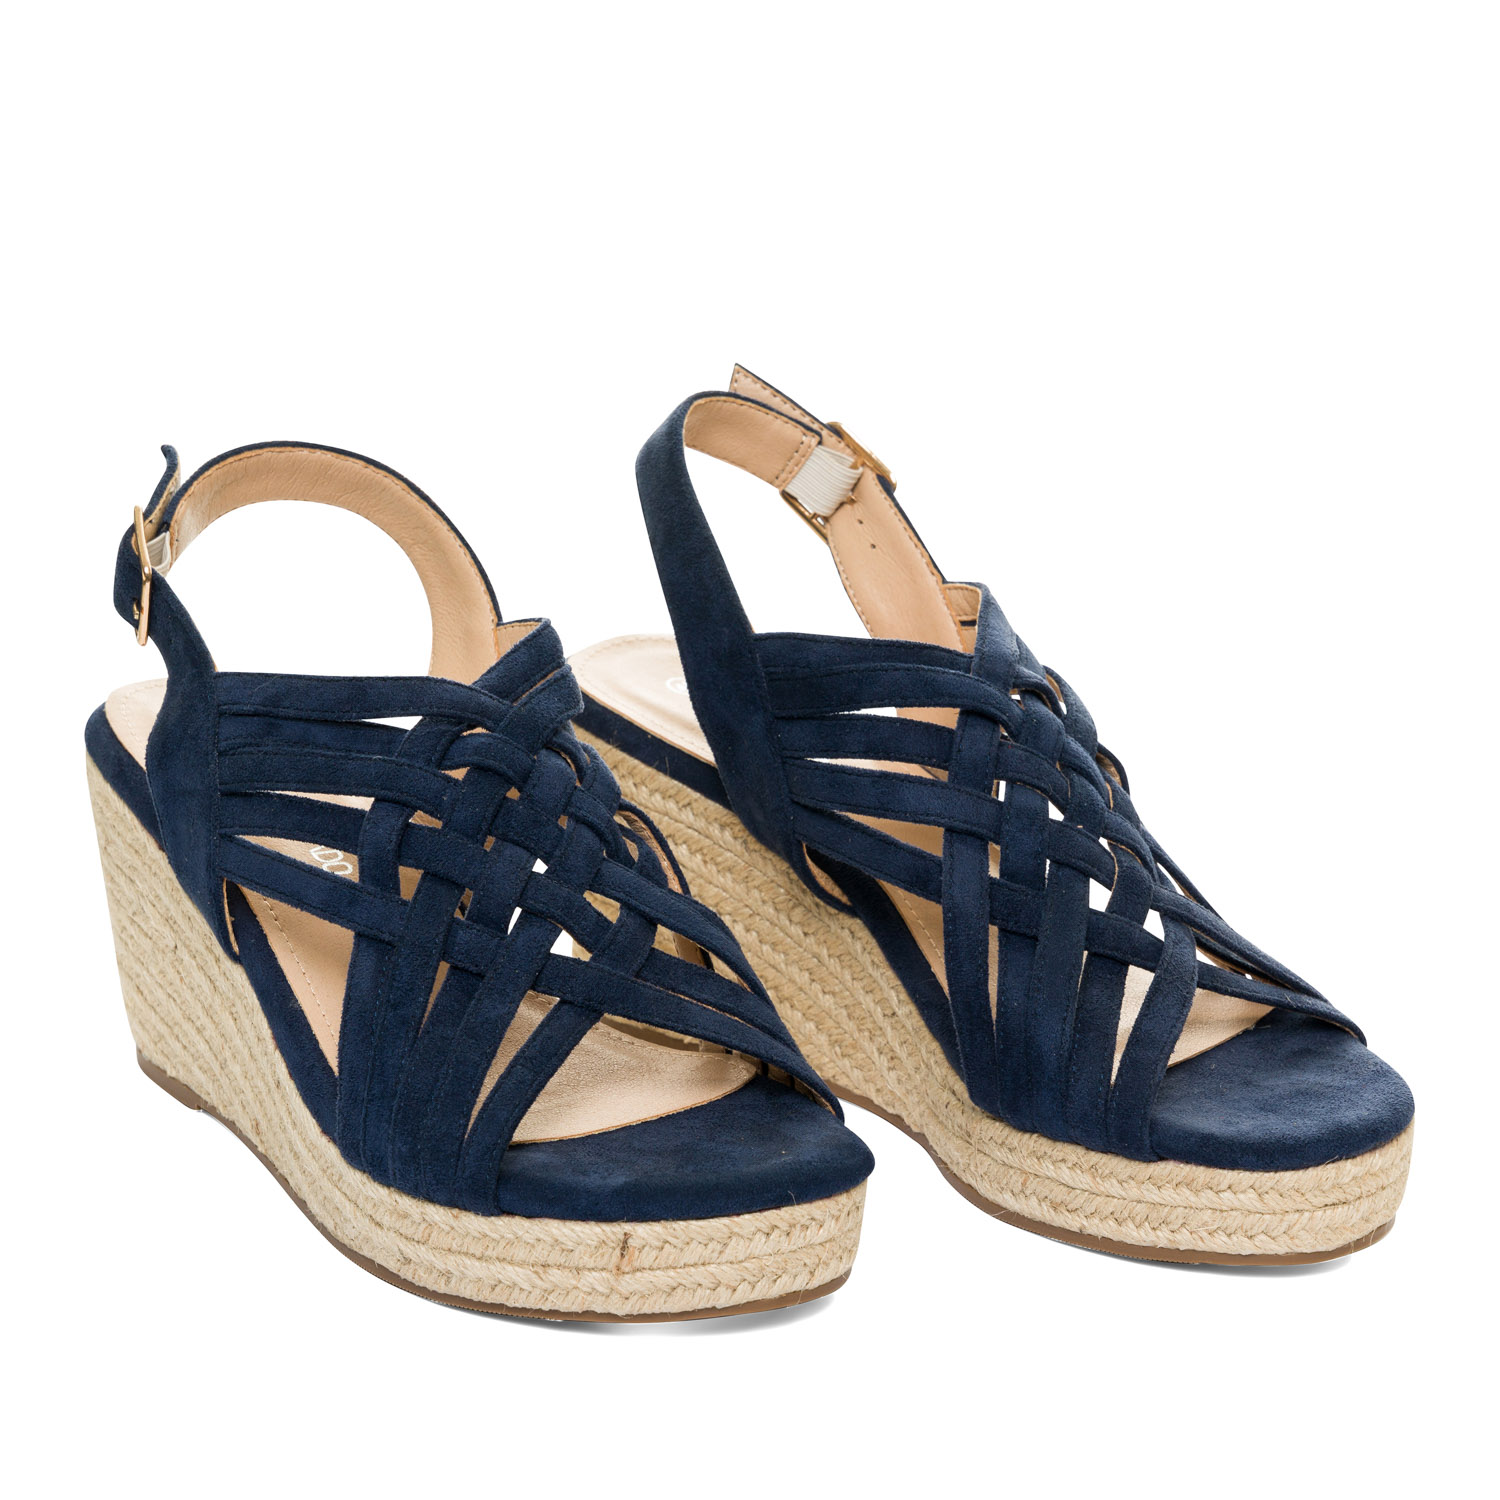 Navy faux suede espadrilles with jute wedge 